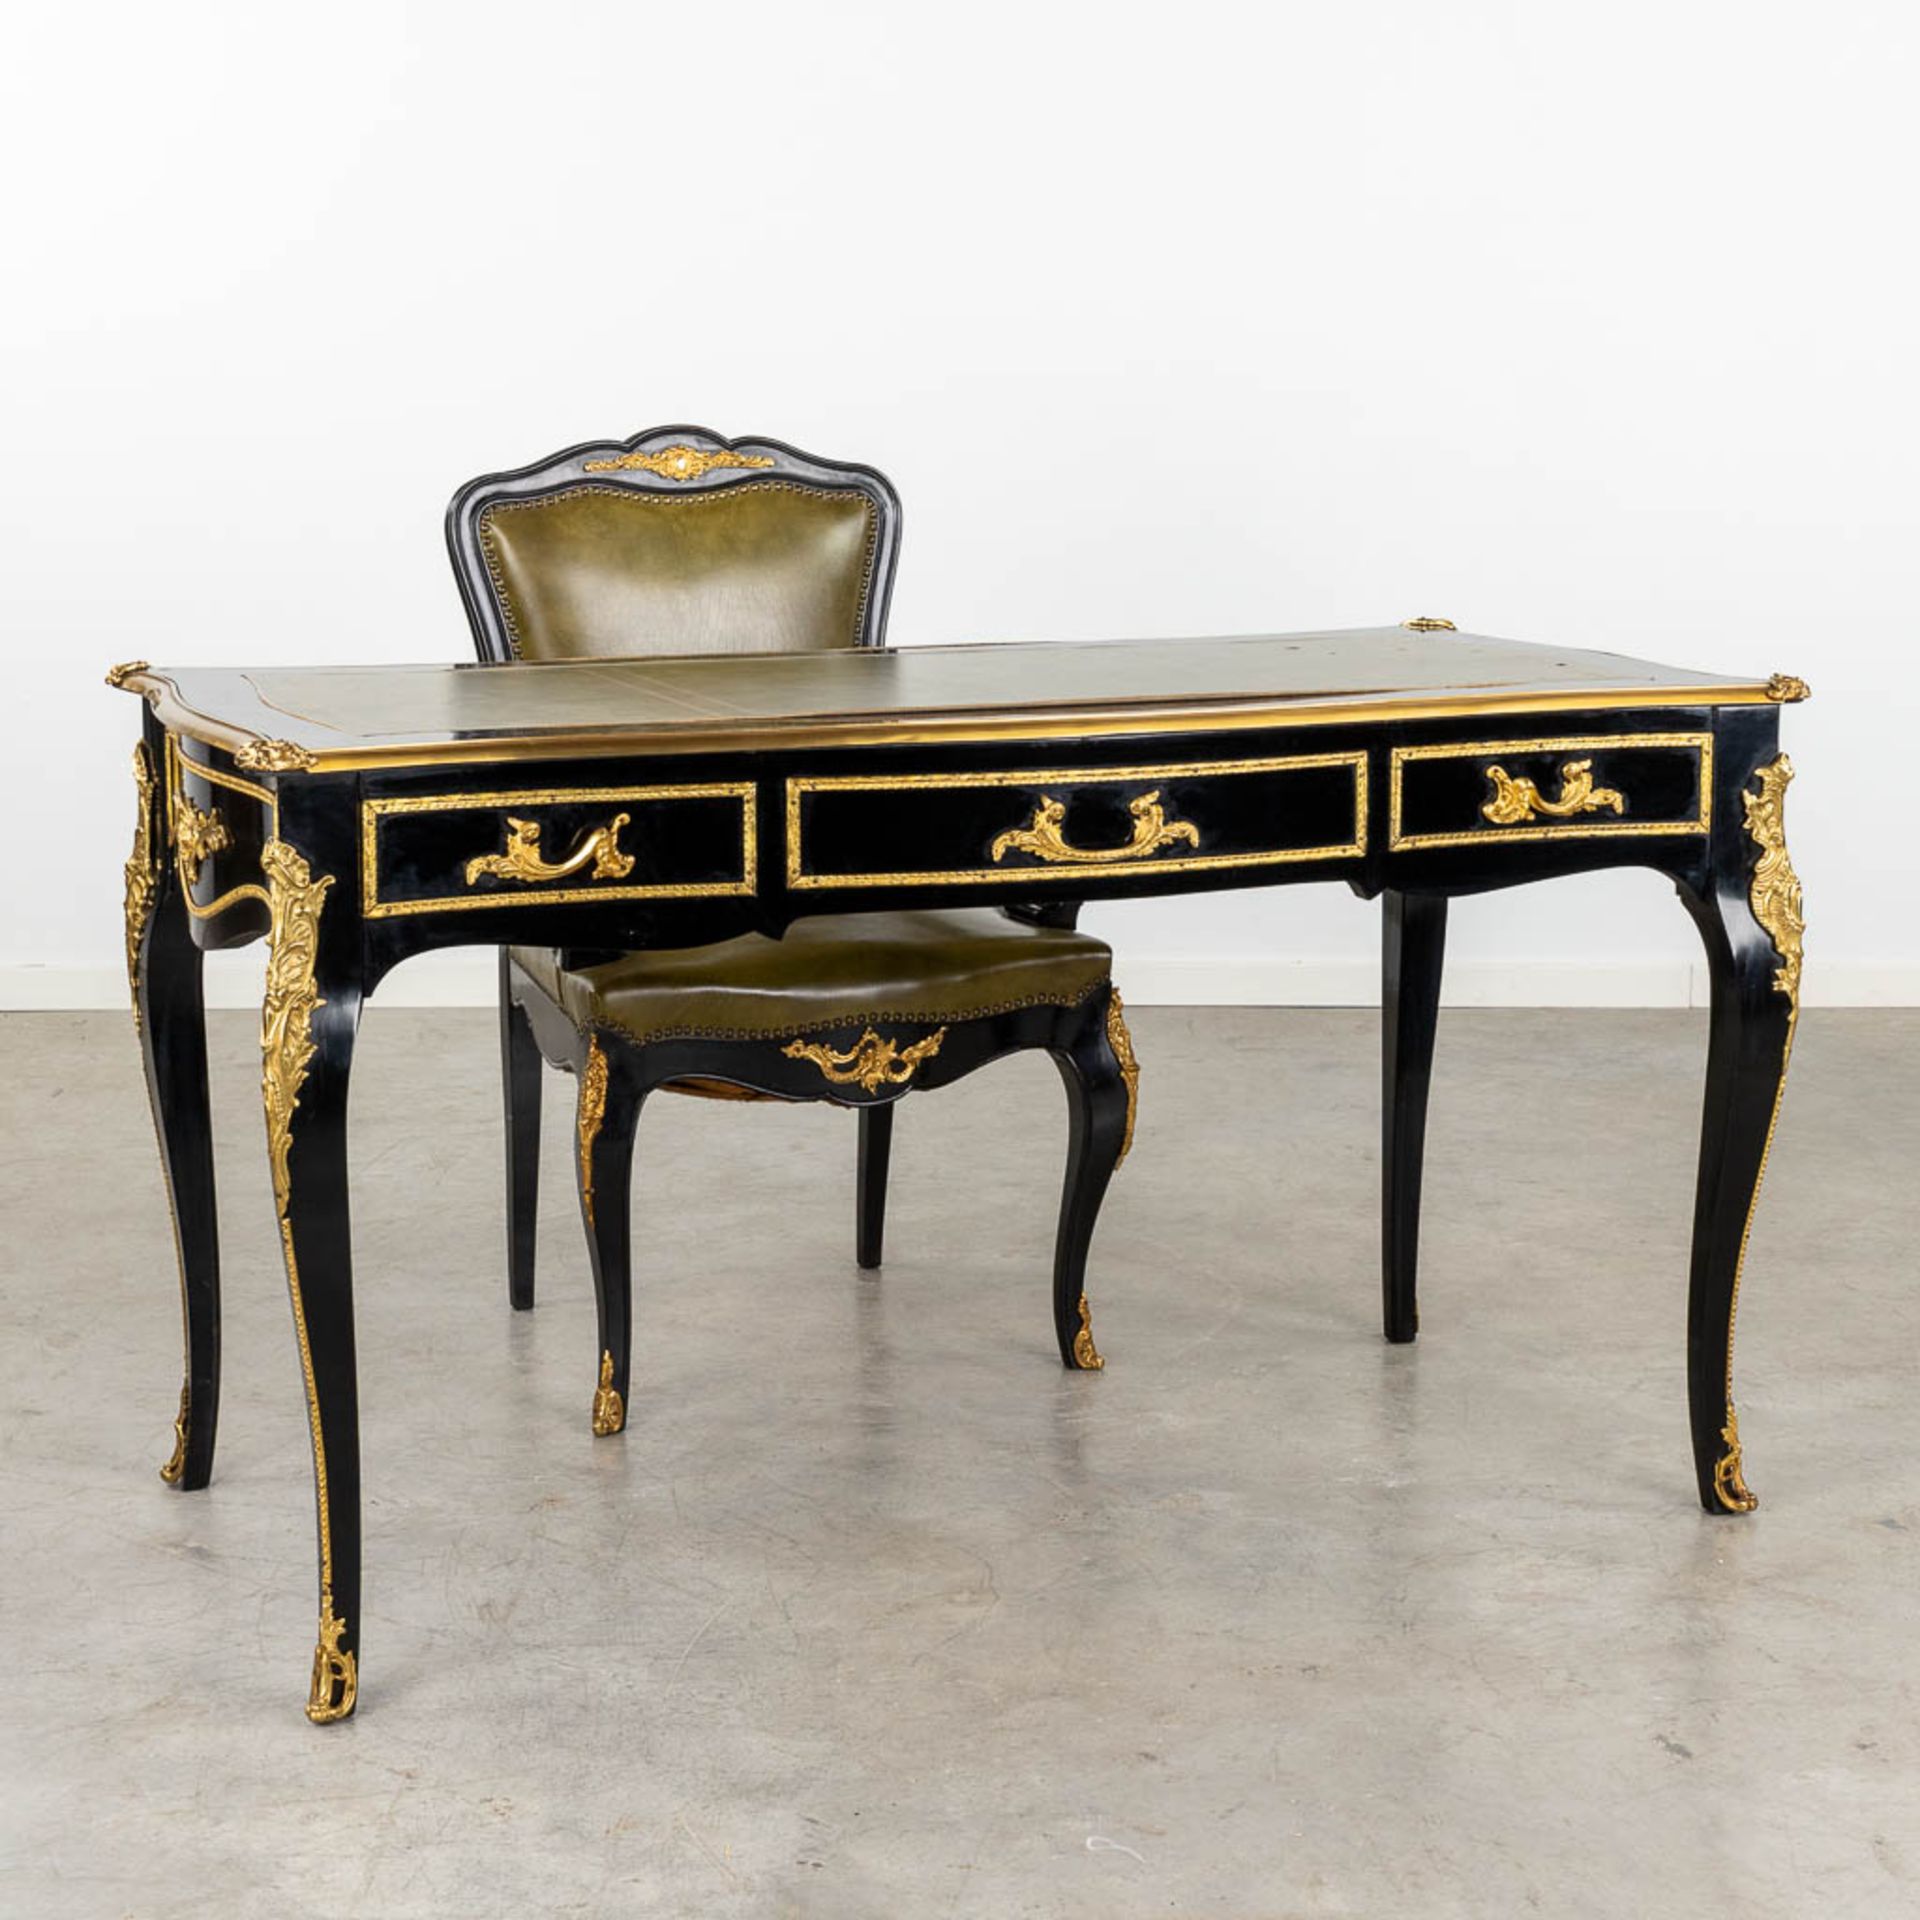 A desk with matching armchair, lacquered and bronze mounted in Louis XV style. 20th C. (D:68 x W:138